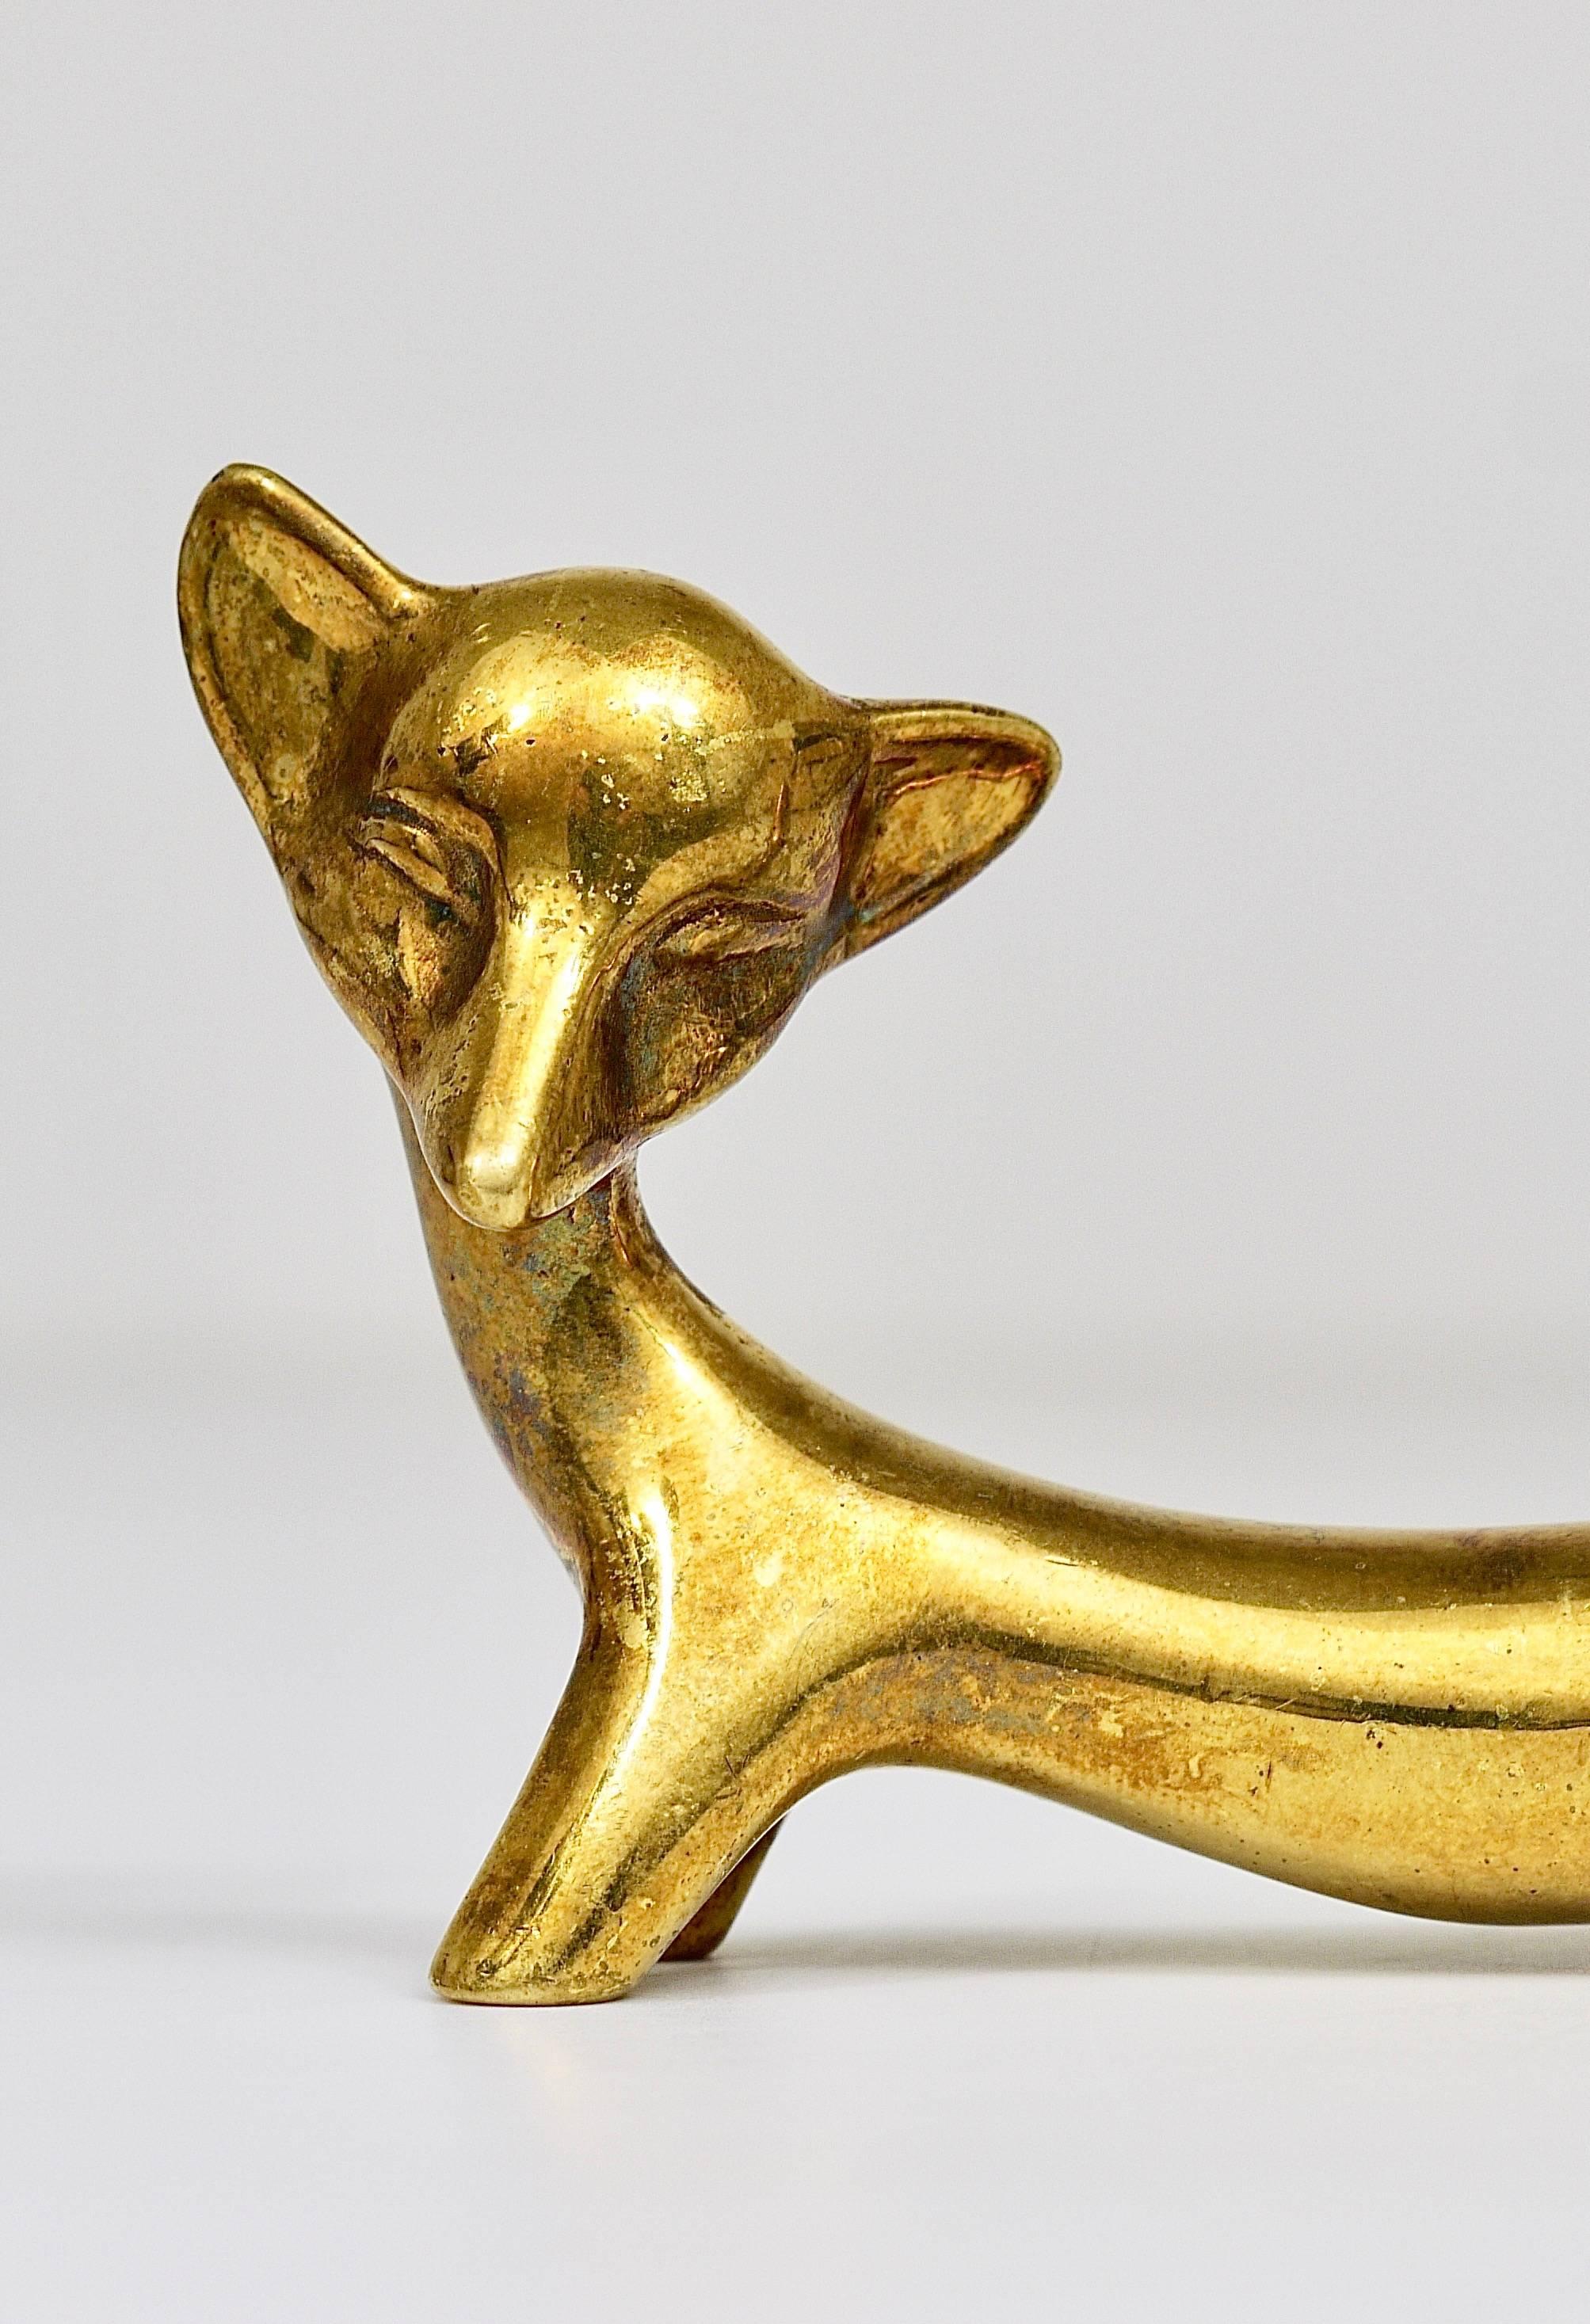 A lovely fox sculpture made of brass from the 1950s. Designed by Walter Bosse, executed by Hertha Baller, Austria. In good condition with charming patina. We offer more Walter Bosse brass objects in our other listings.